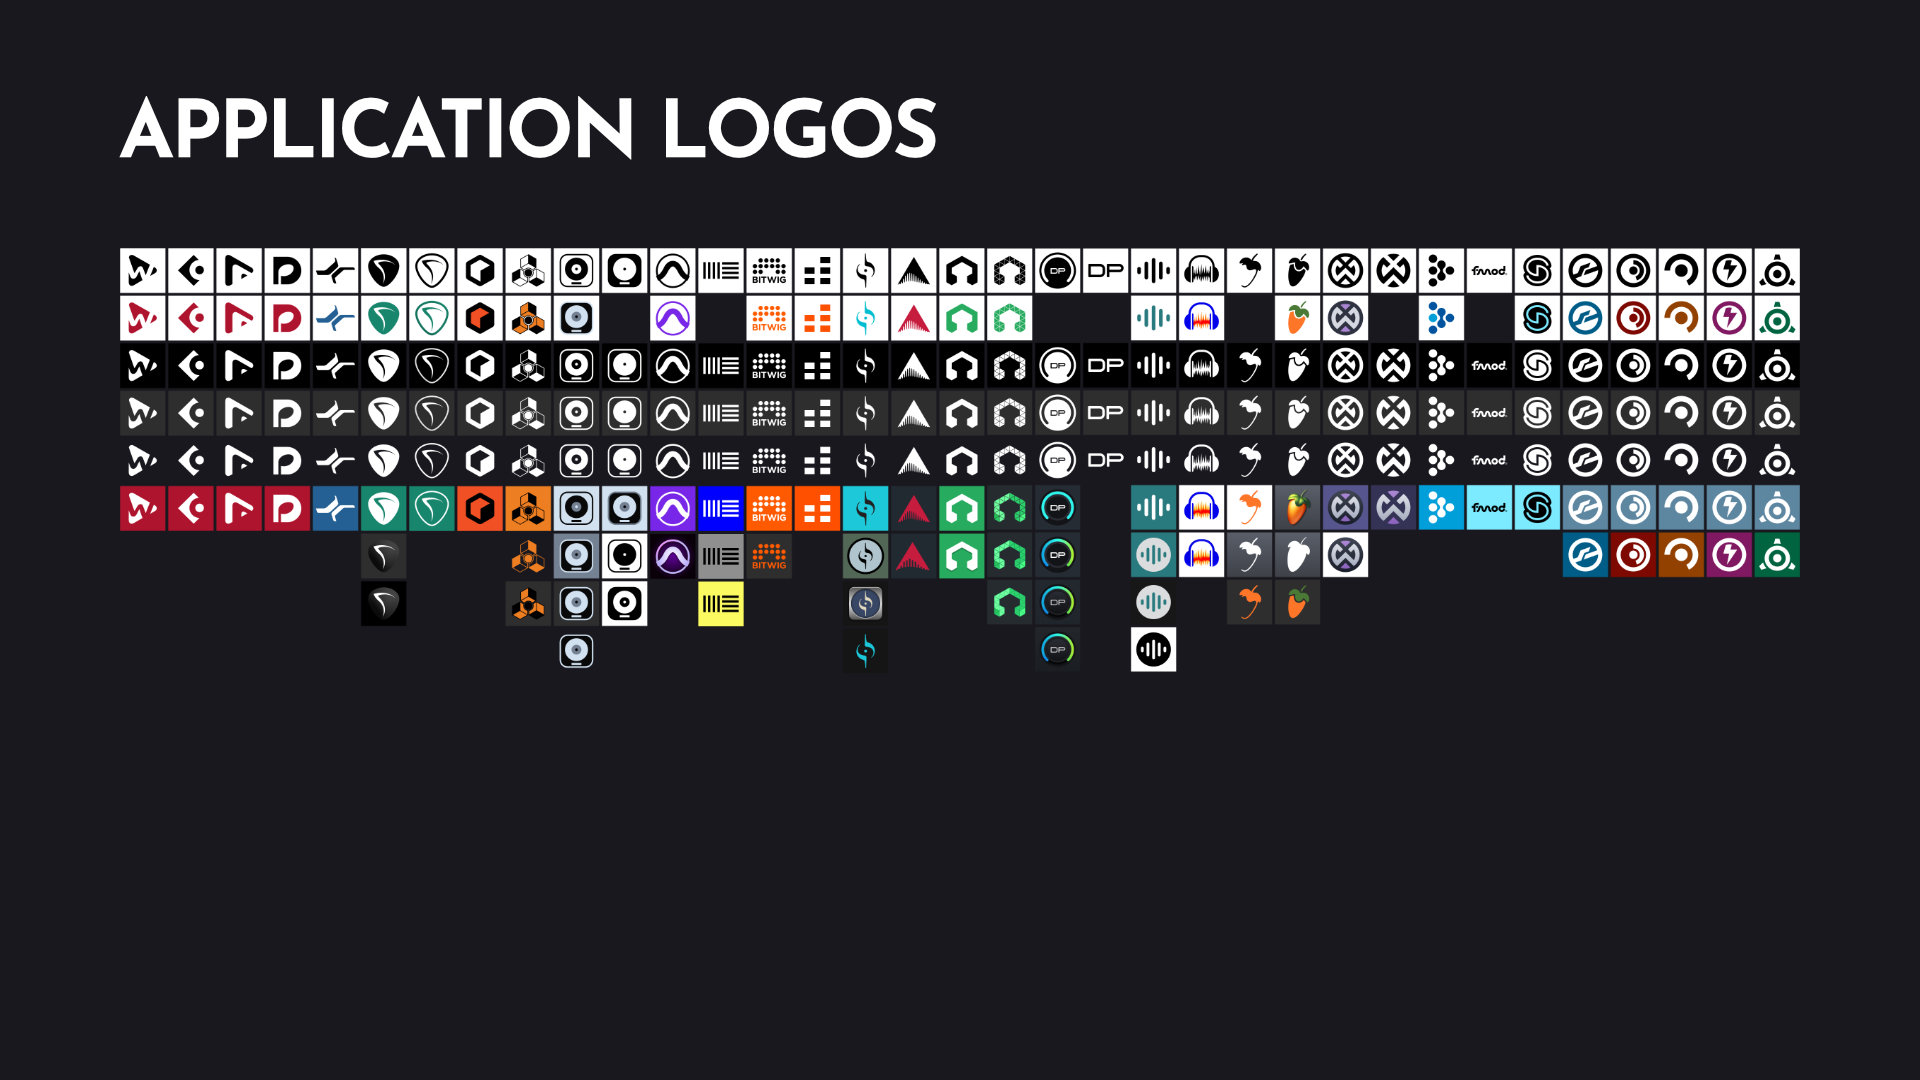 Package contents. Showing all application logos.